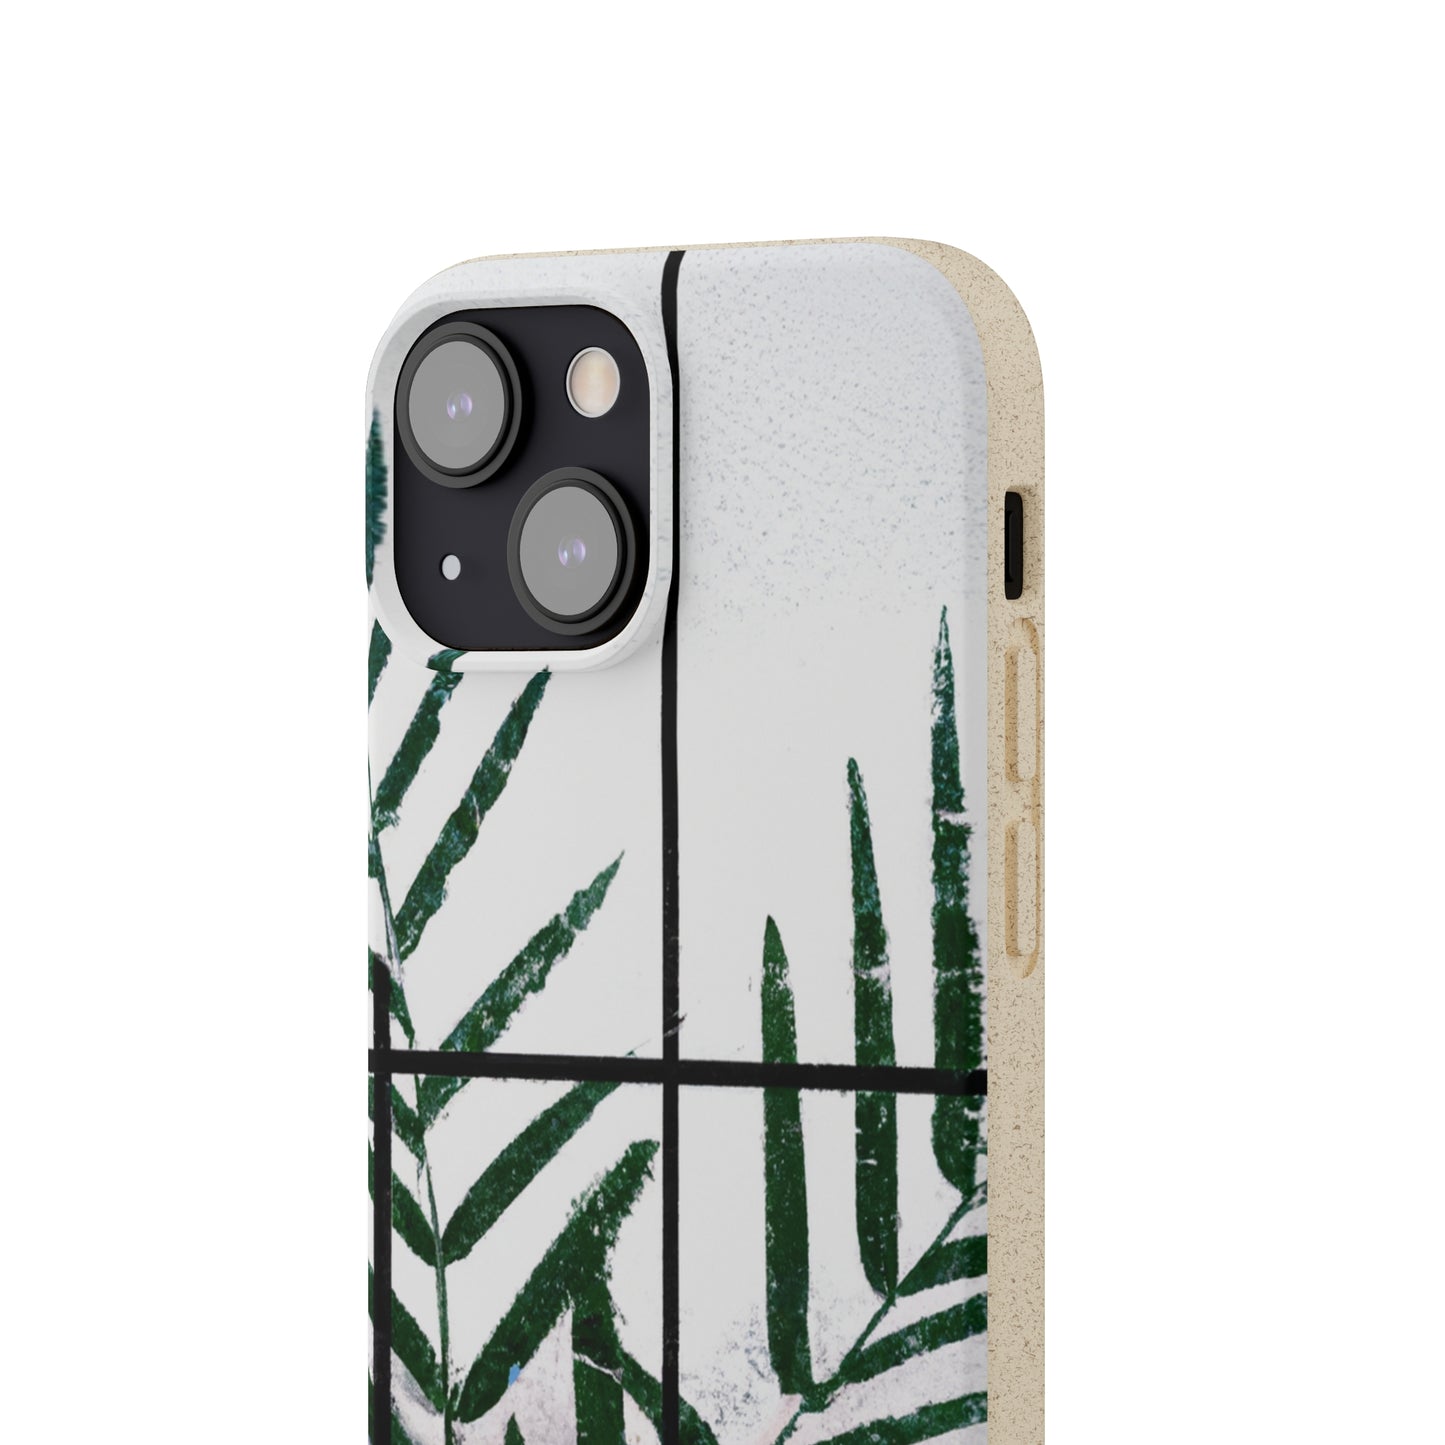 "Geometry Of Nature: A Burst Of Color" - Bam Boo! Lifestyle Eco-friendly Cases